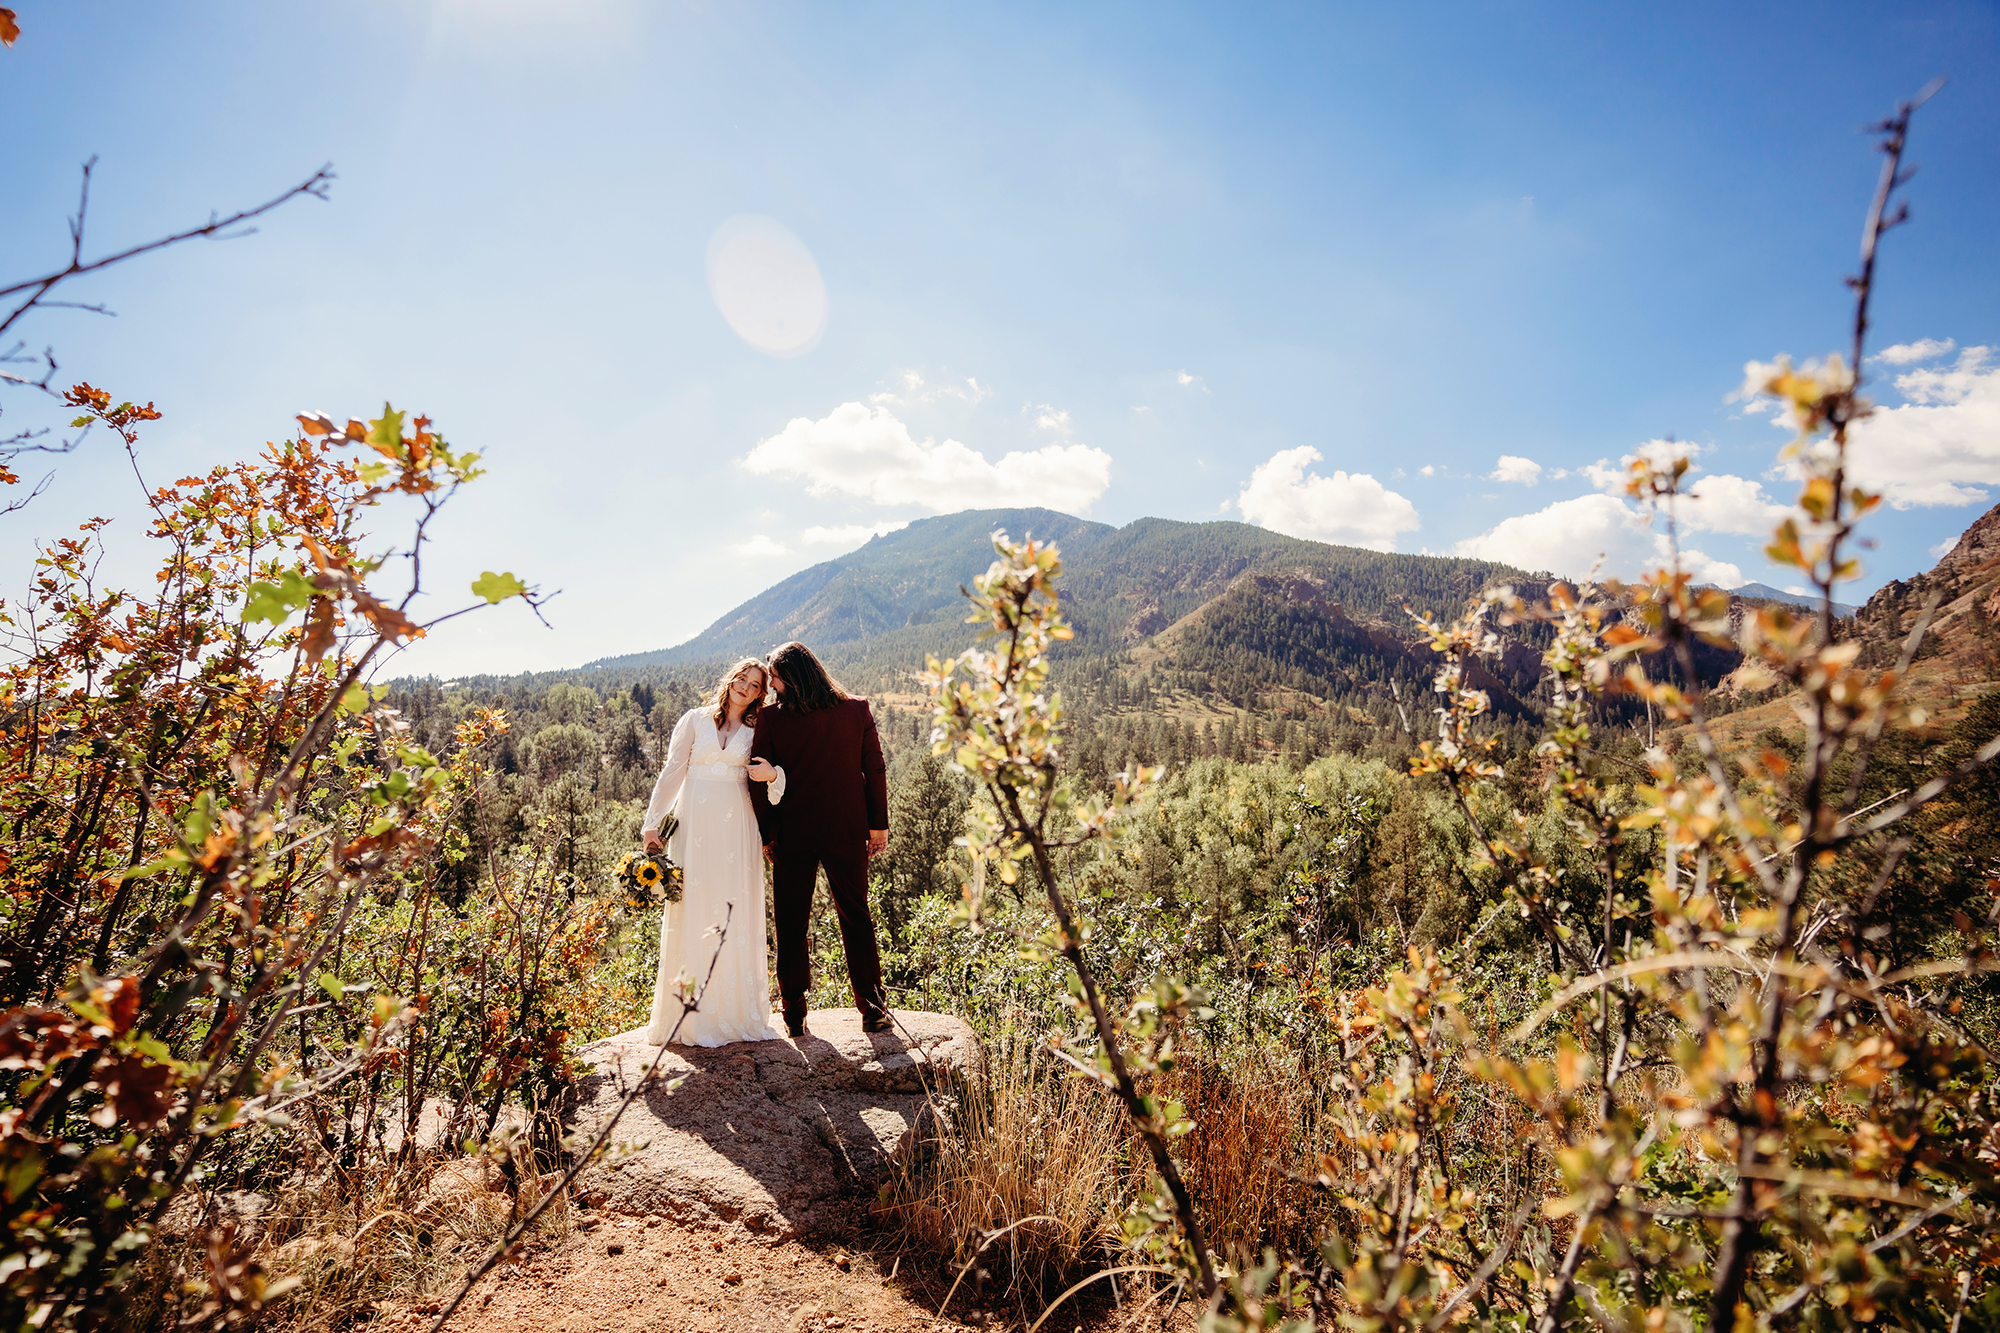 Bride and groom stand on an rock amid mountain foliage on a sunny day in photo captured by Colorado elopement photographers